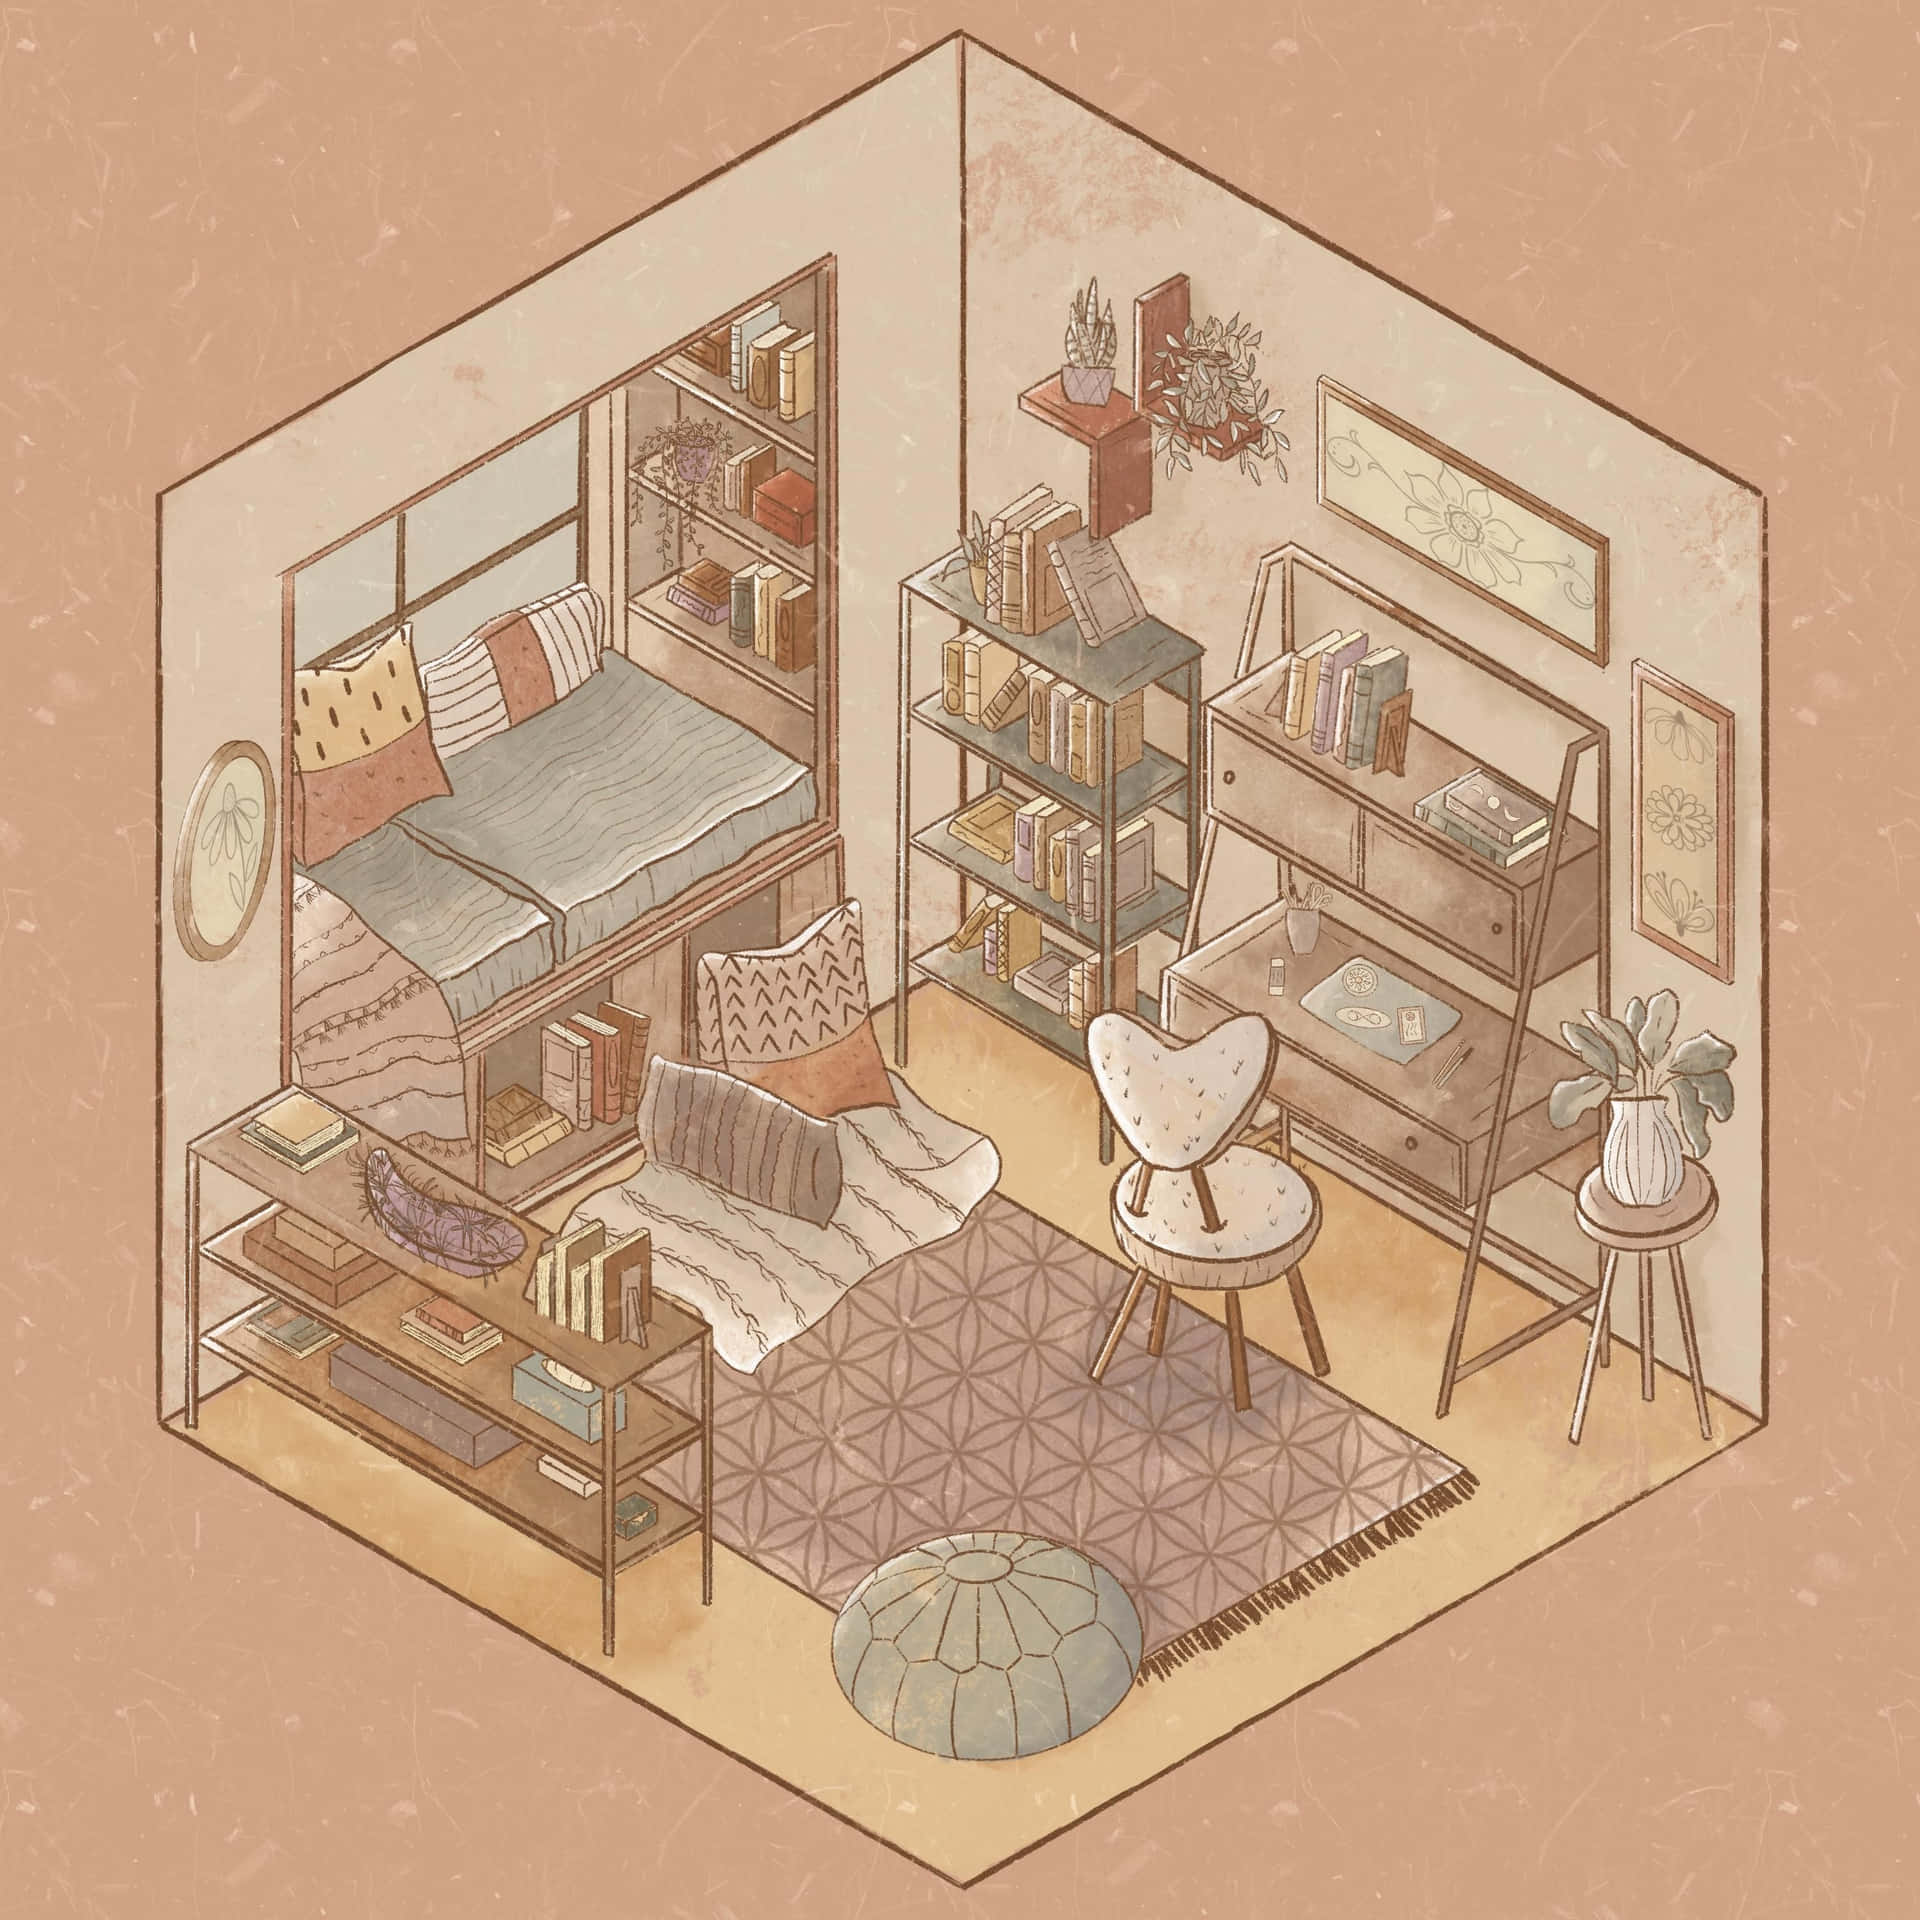 A Room With A Bed, Sofa, And Bookshelf